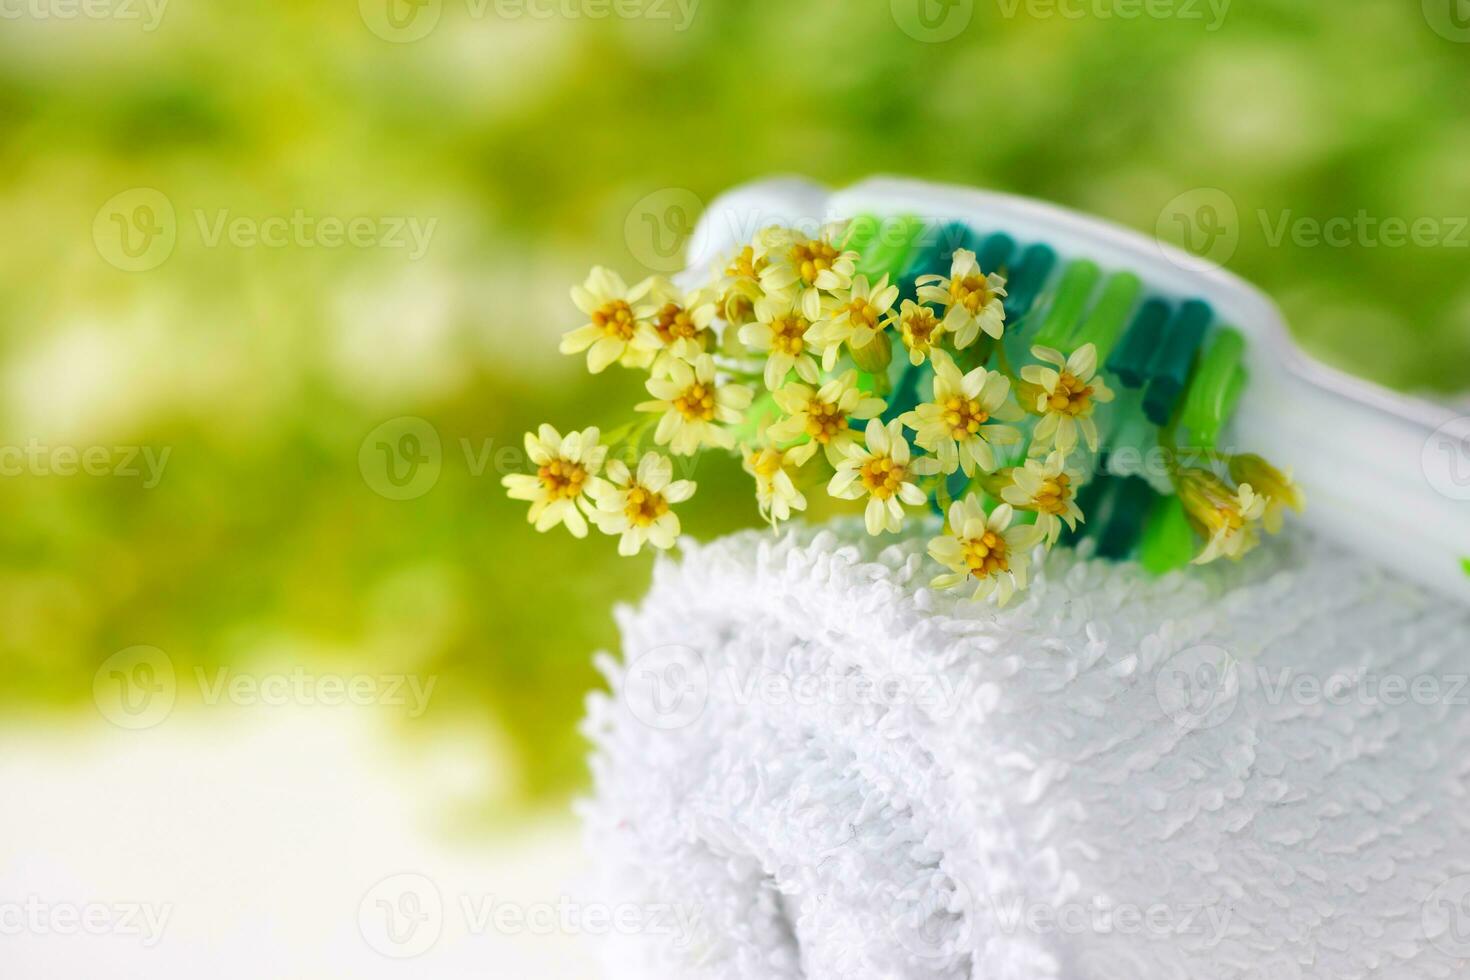 Toothbrush with tiny flowers photo